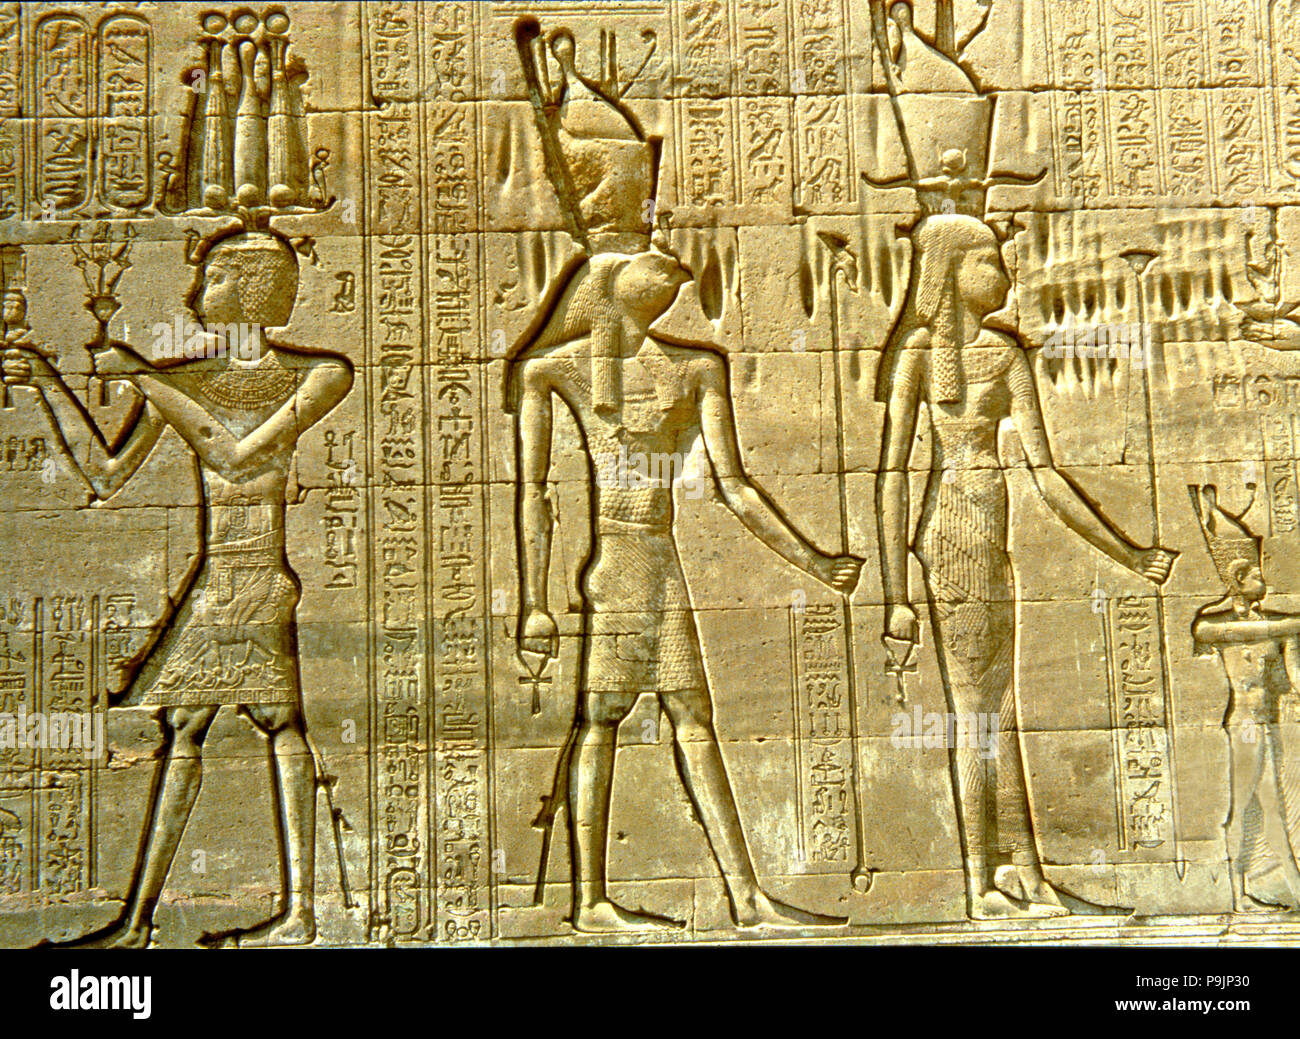 Reliefs with figures and writing in the Temple of Hathor. Stock Photo